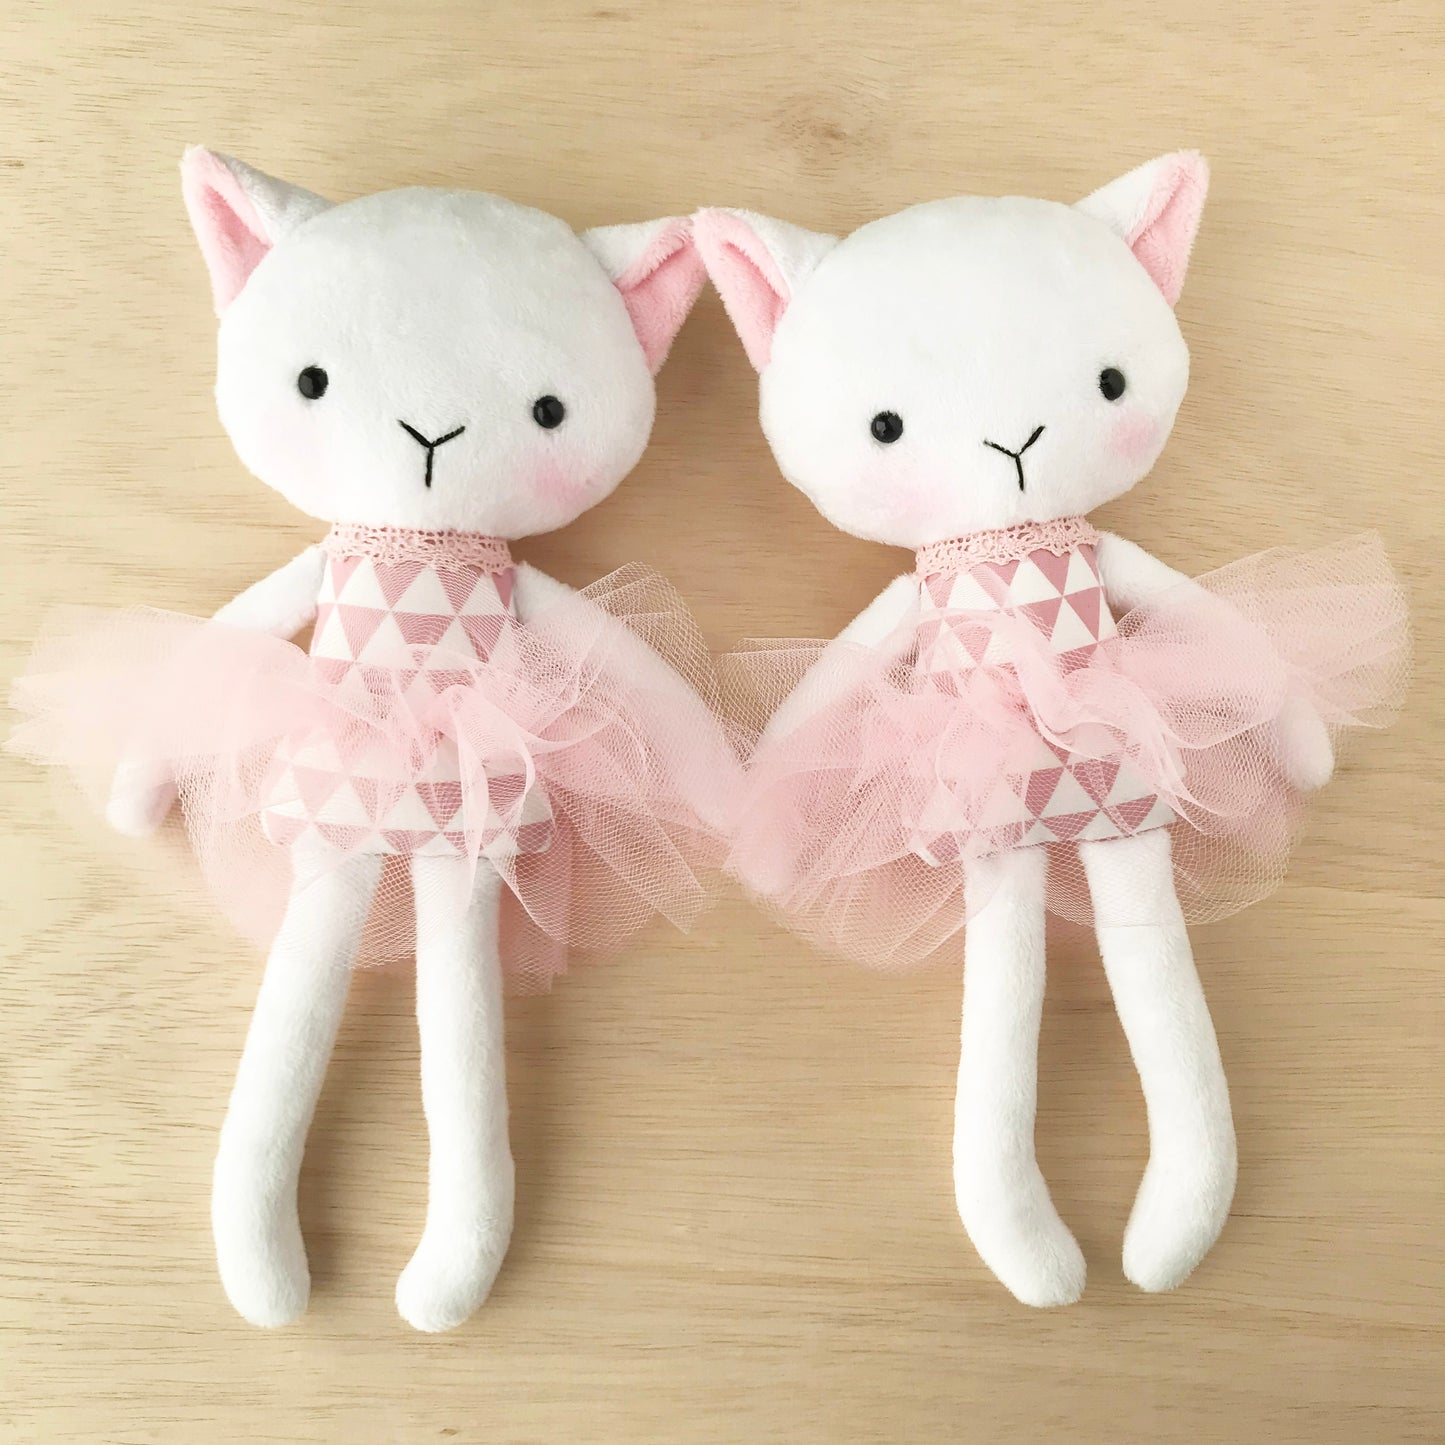 Cat doll - made to order